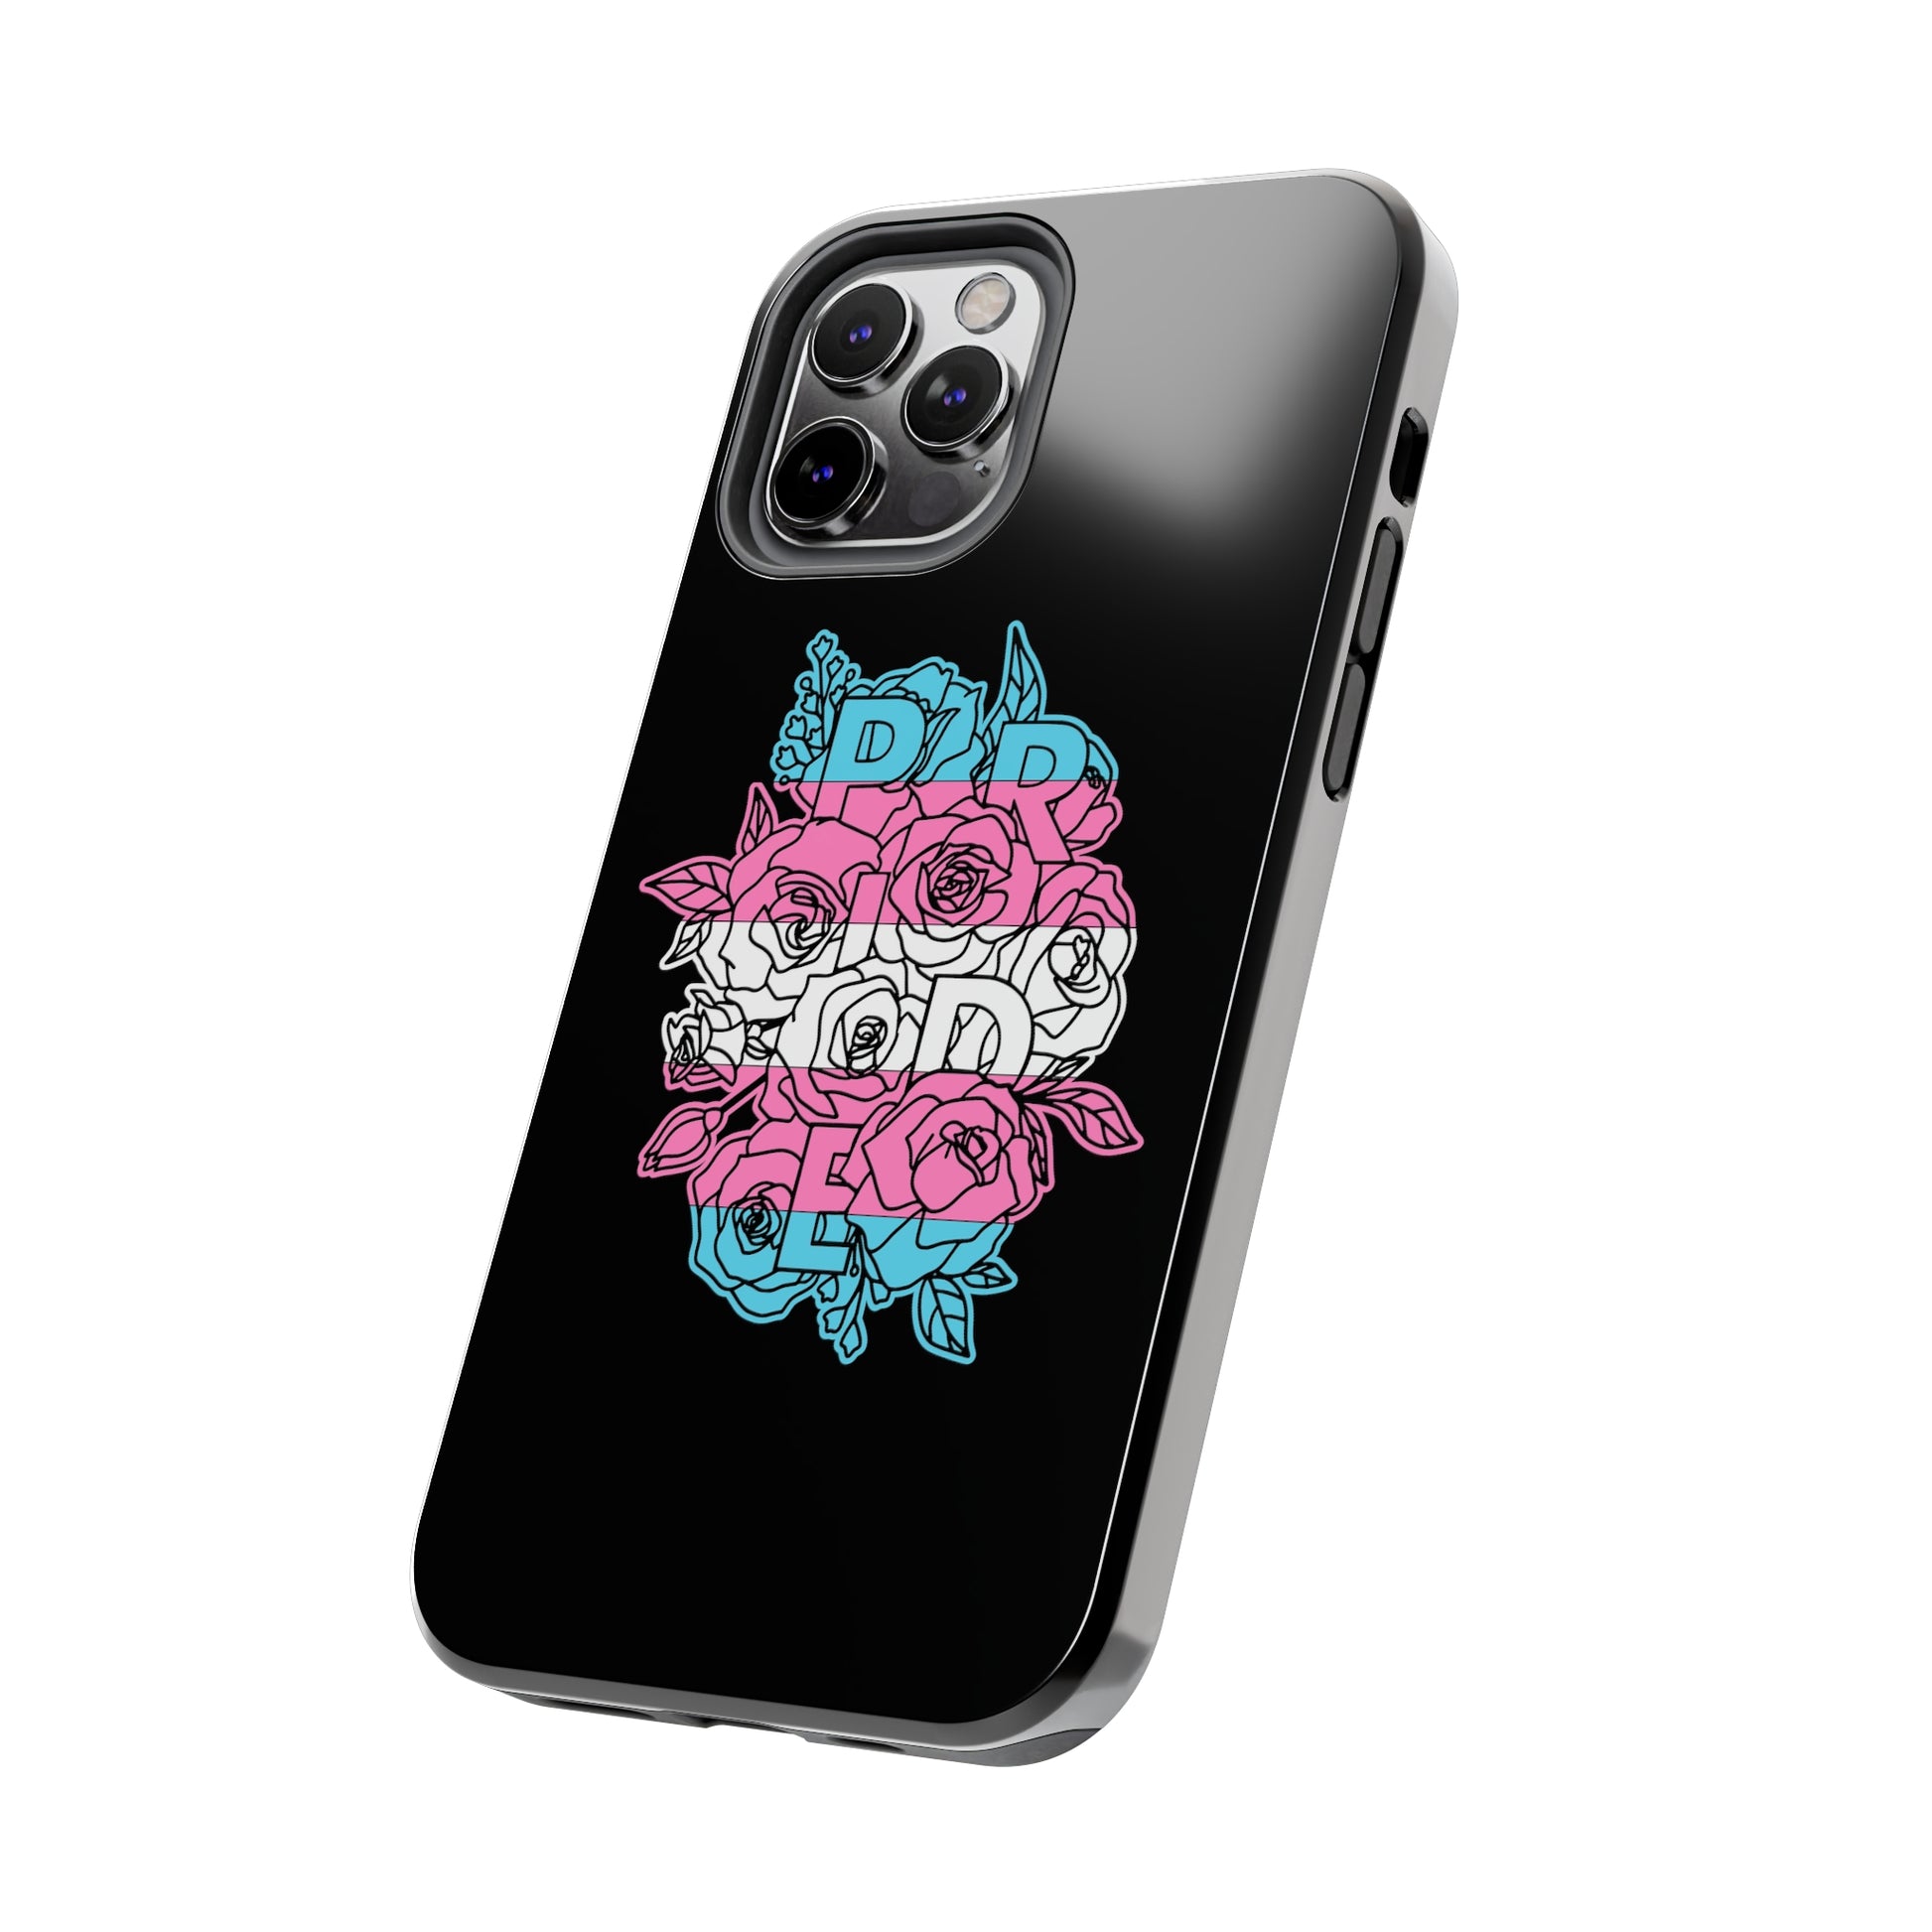 Trans Pride iPhone Case - Equality Trading Post 